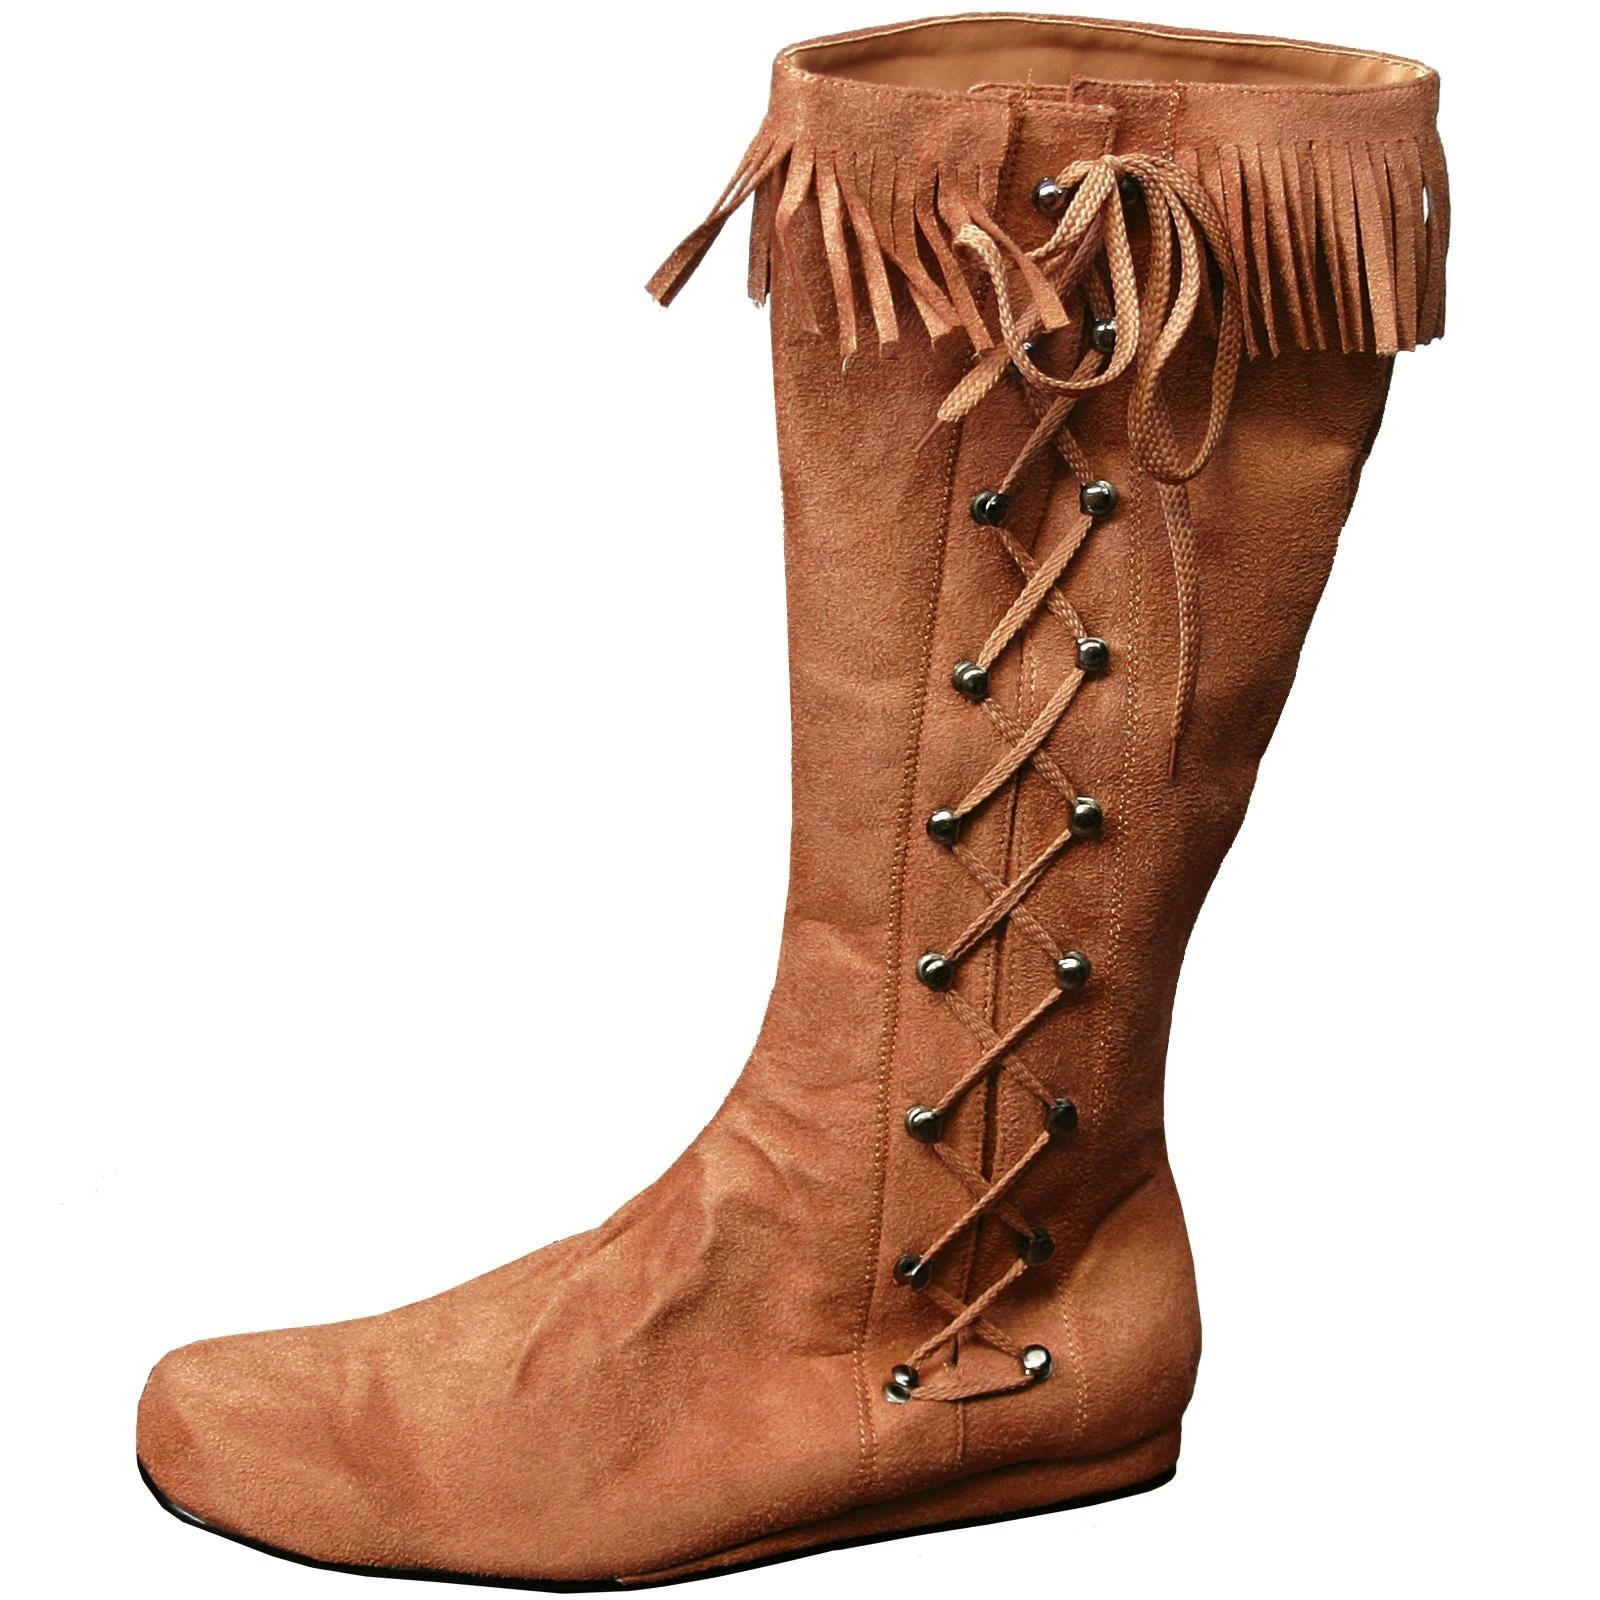 Indian Side Lace Adult Boot